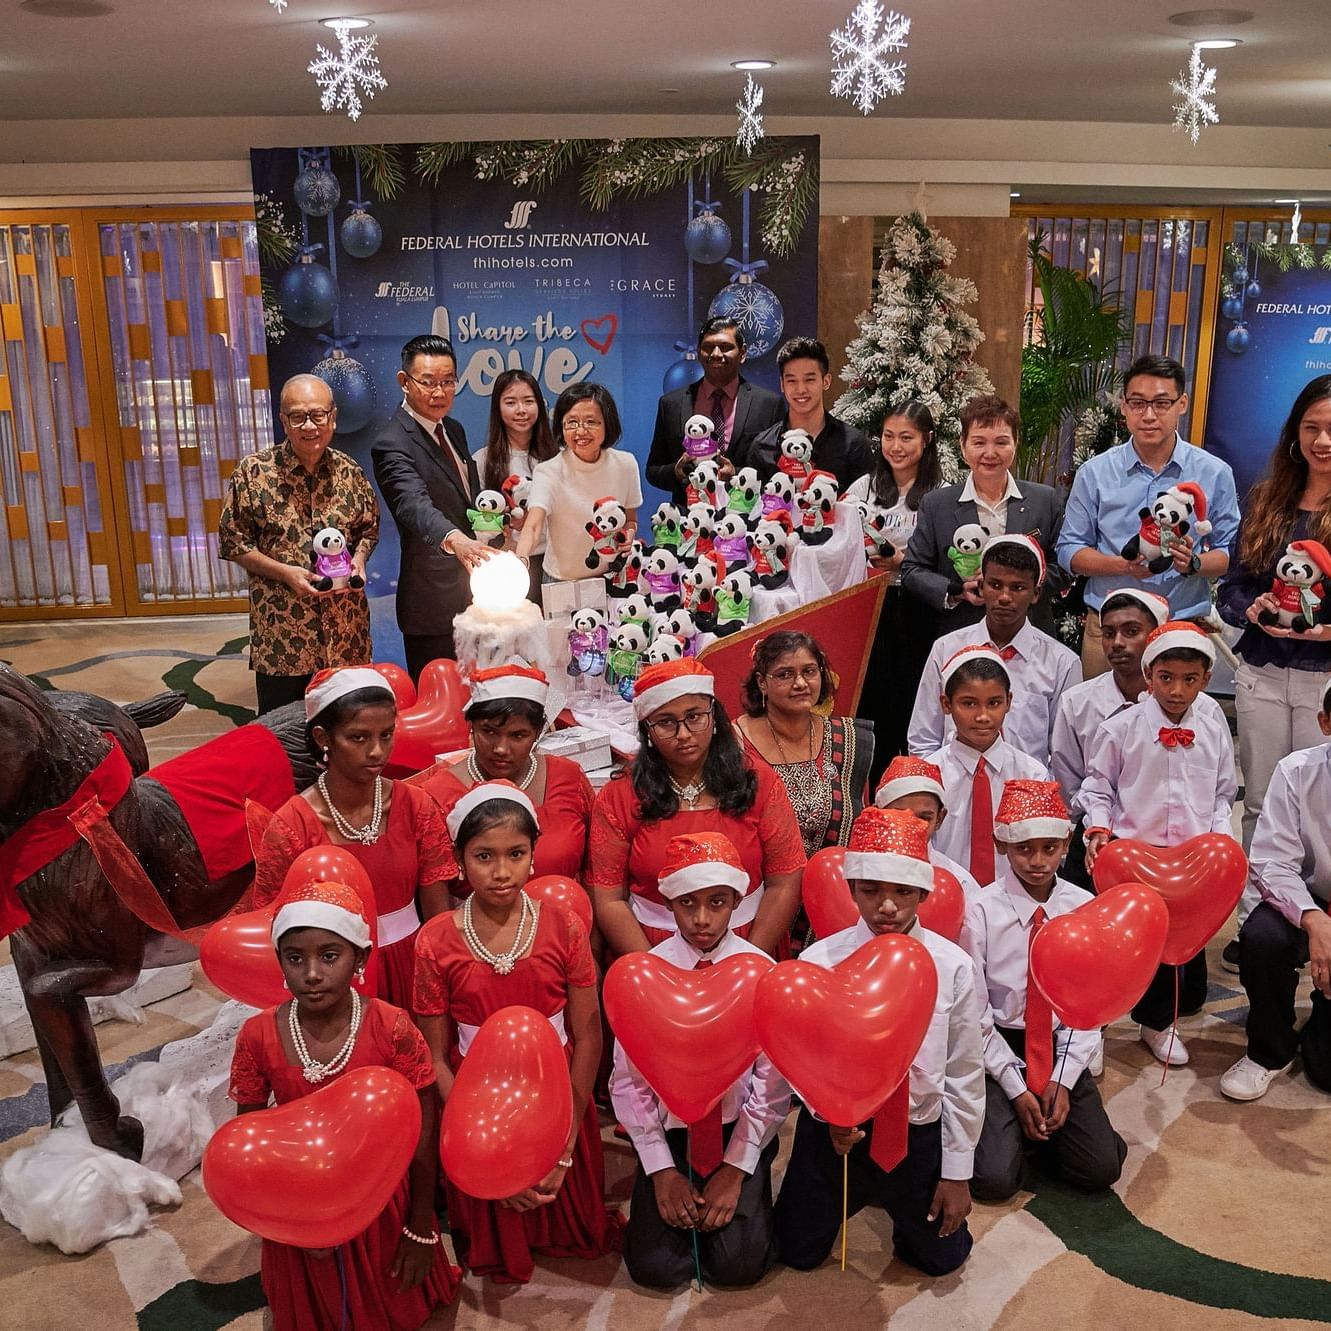 Children gathered for an event at Federal Hotels International